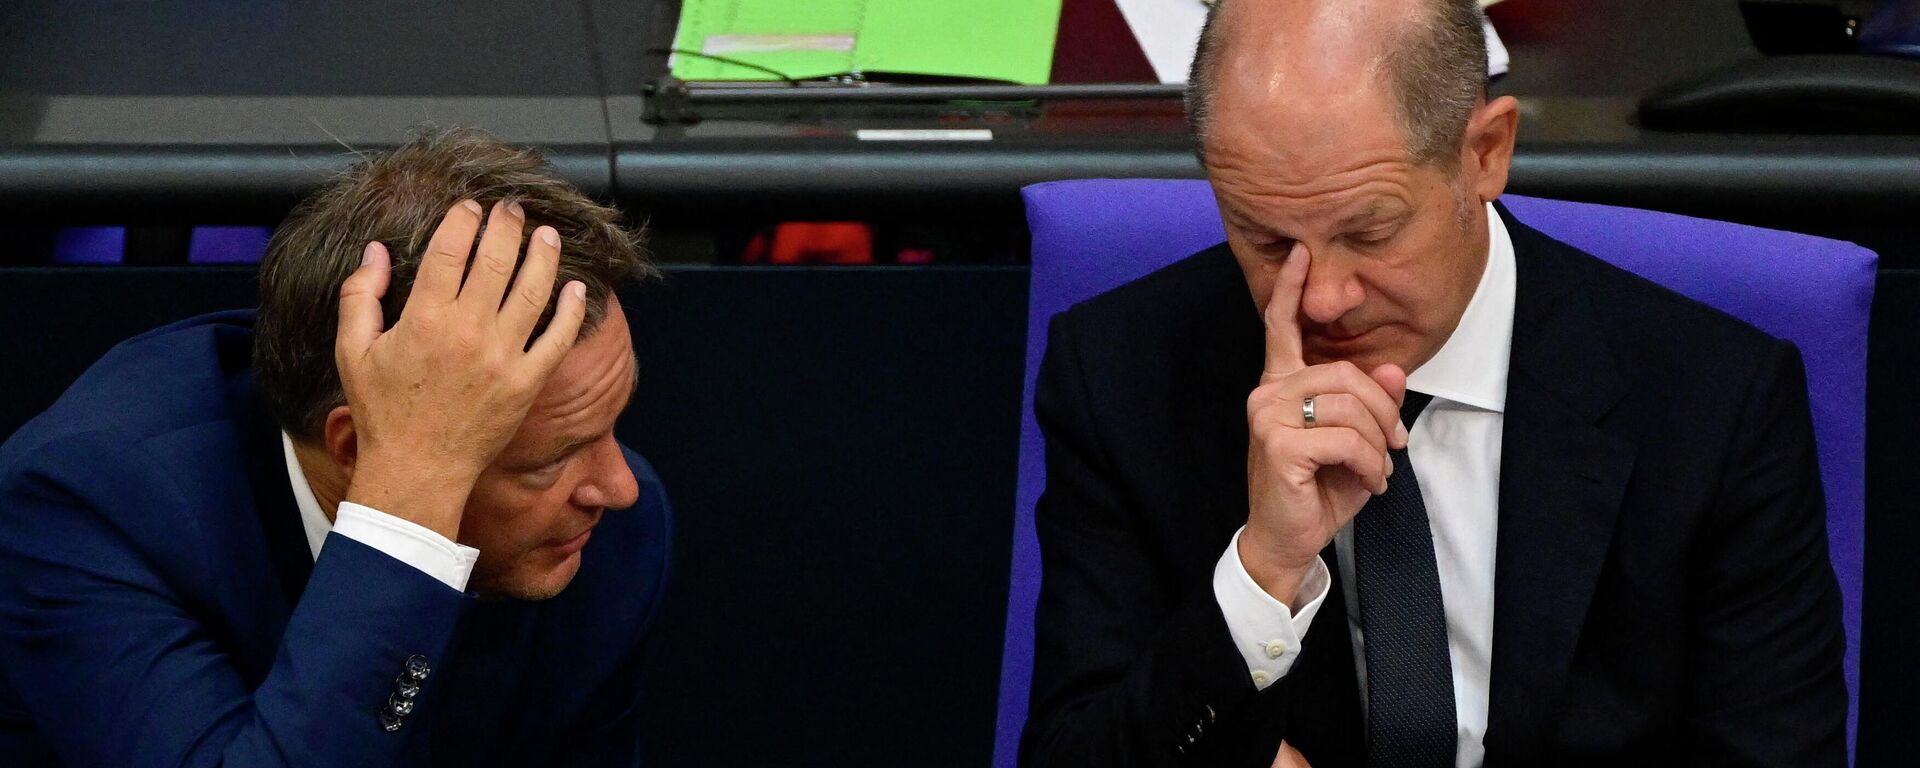 German Minister of Economics and Climate Protection Robert Habeck (L) and German Chancellor Olaf Scholz talk during a debate on the federal budget 2023 at the Bundestag, the German lower house of Parliament, on September 6, 2022 in Berlin. (Photo by John MACDOUGALL / AFP) - Sputnik International, 1920, 11.09.2022